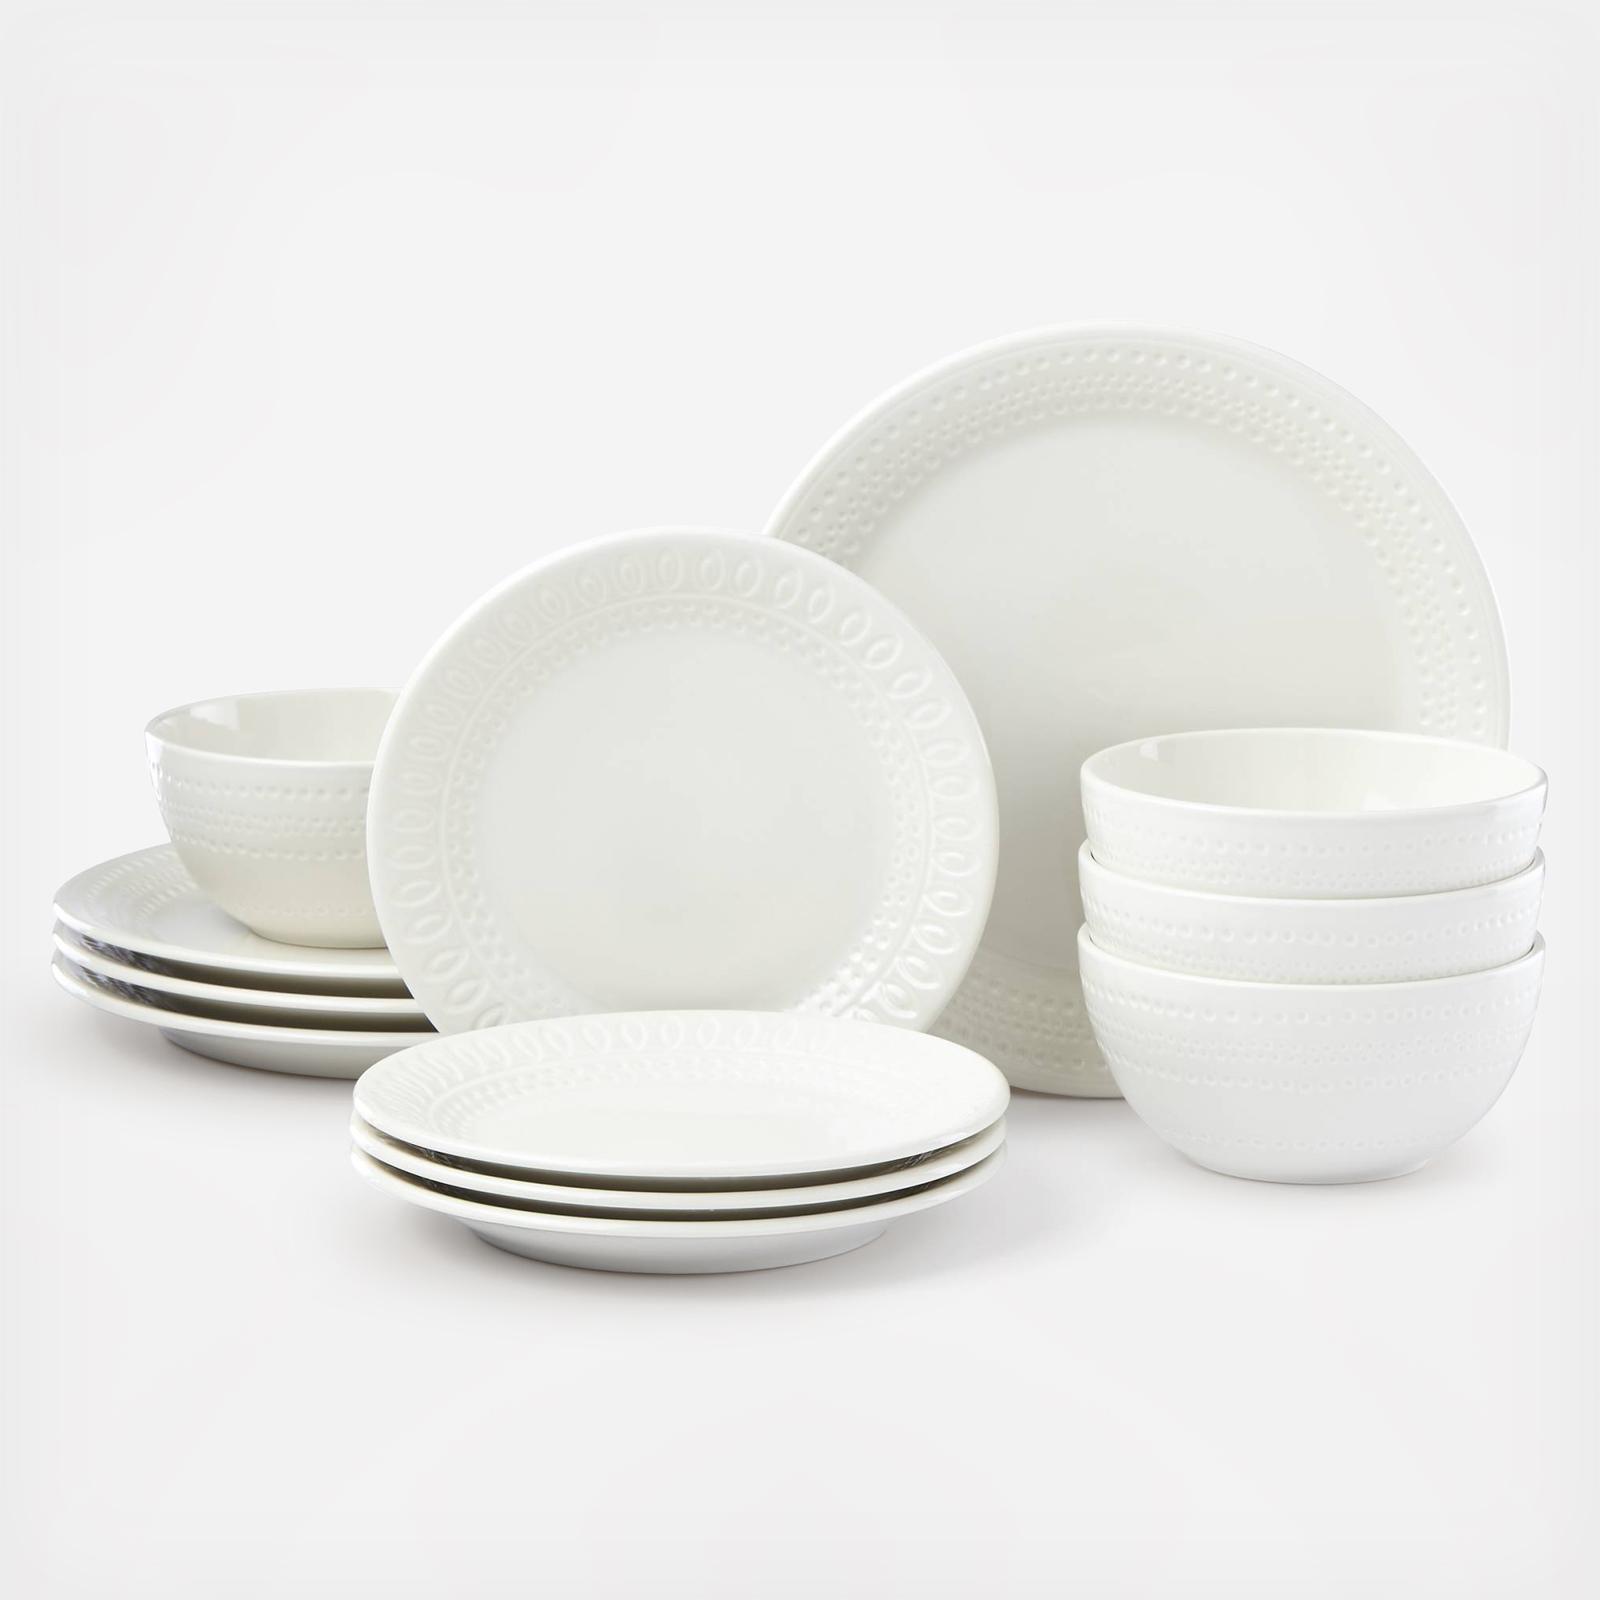 kate spade new york, Willow Drive 12-Piece Dinnerware Set, Service for 4 -  Zola